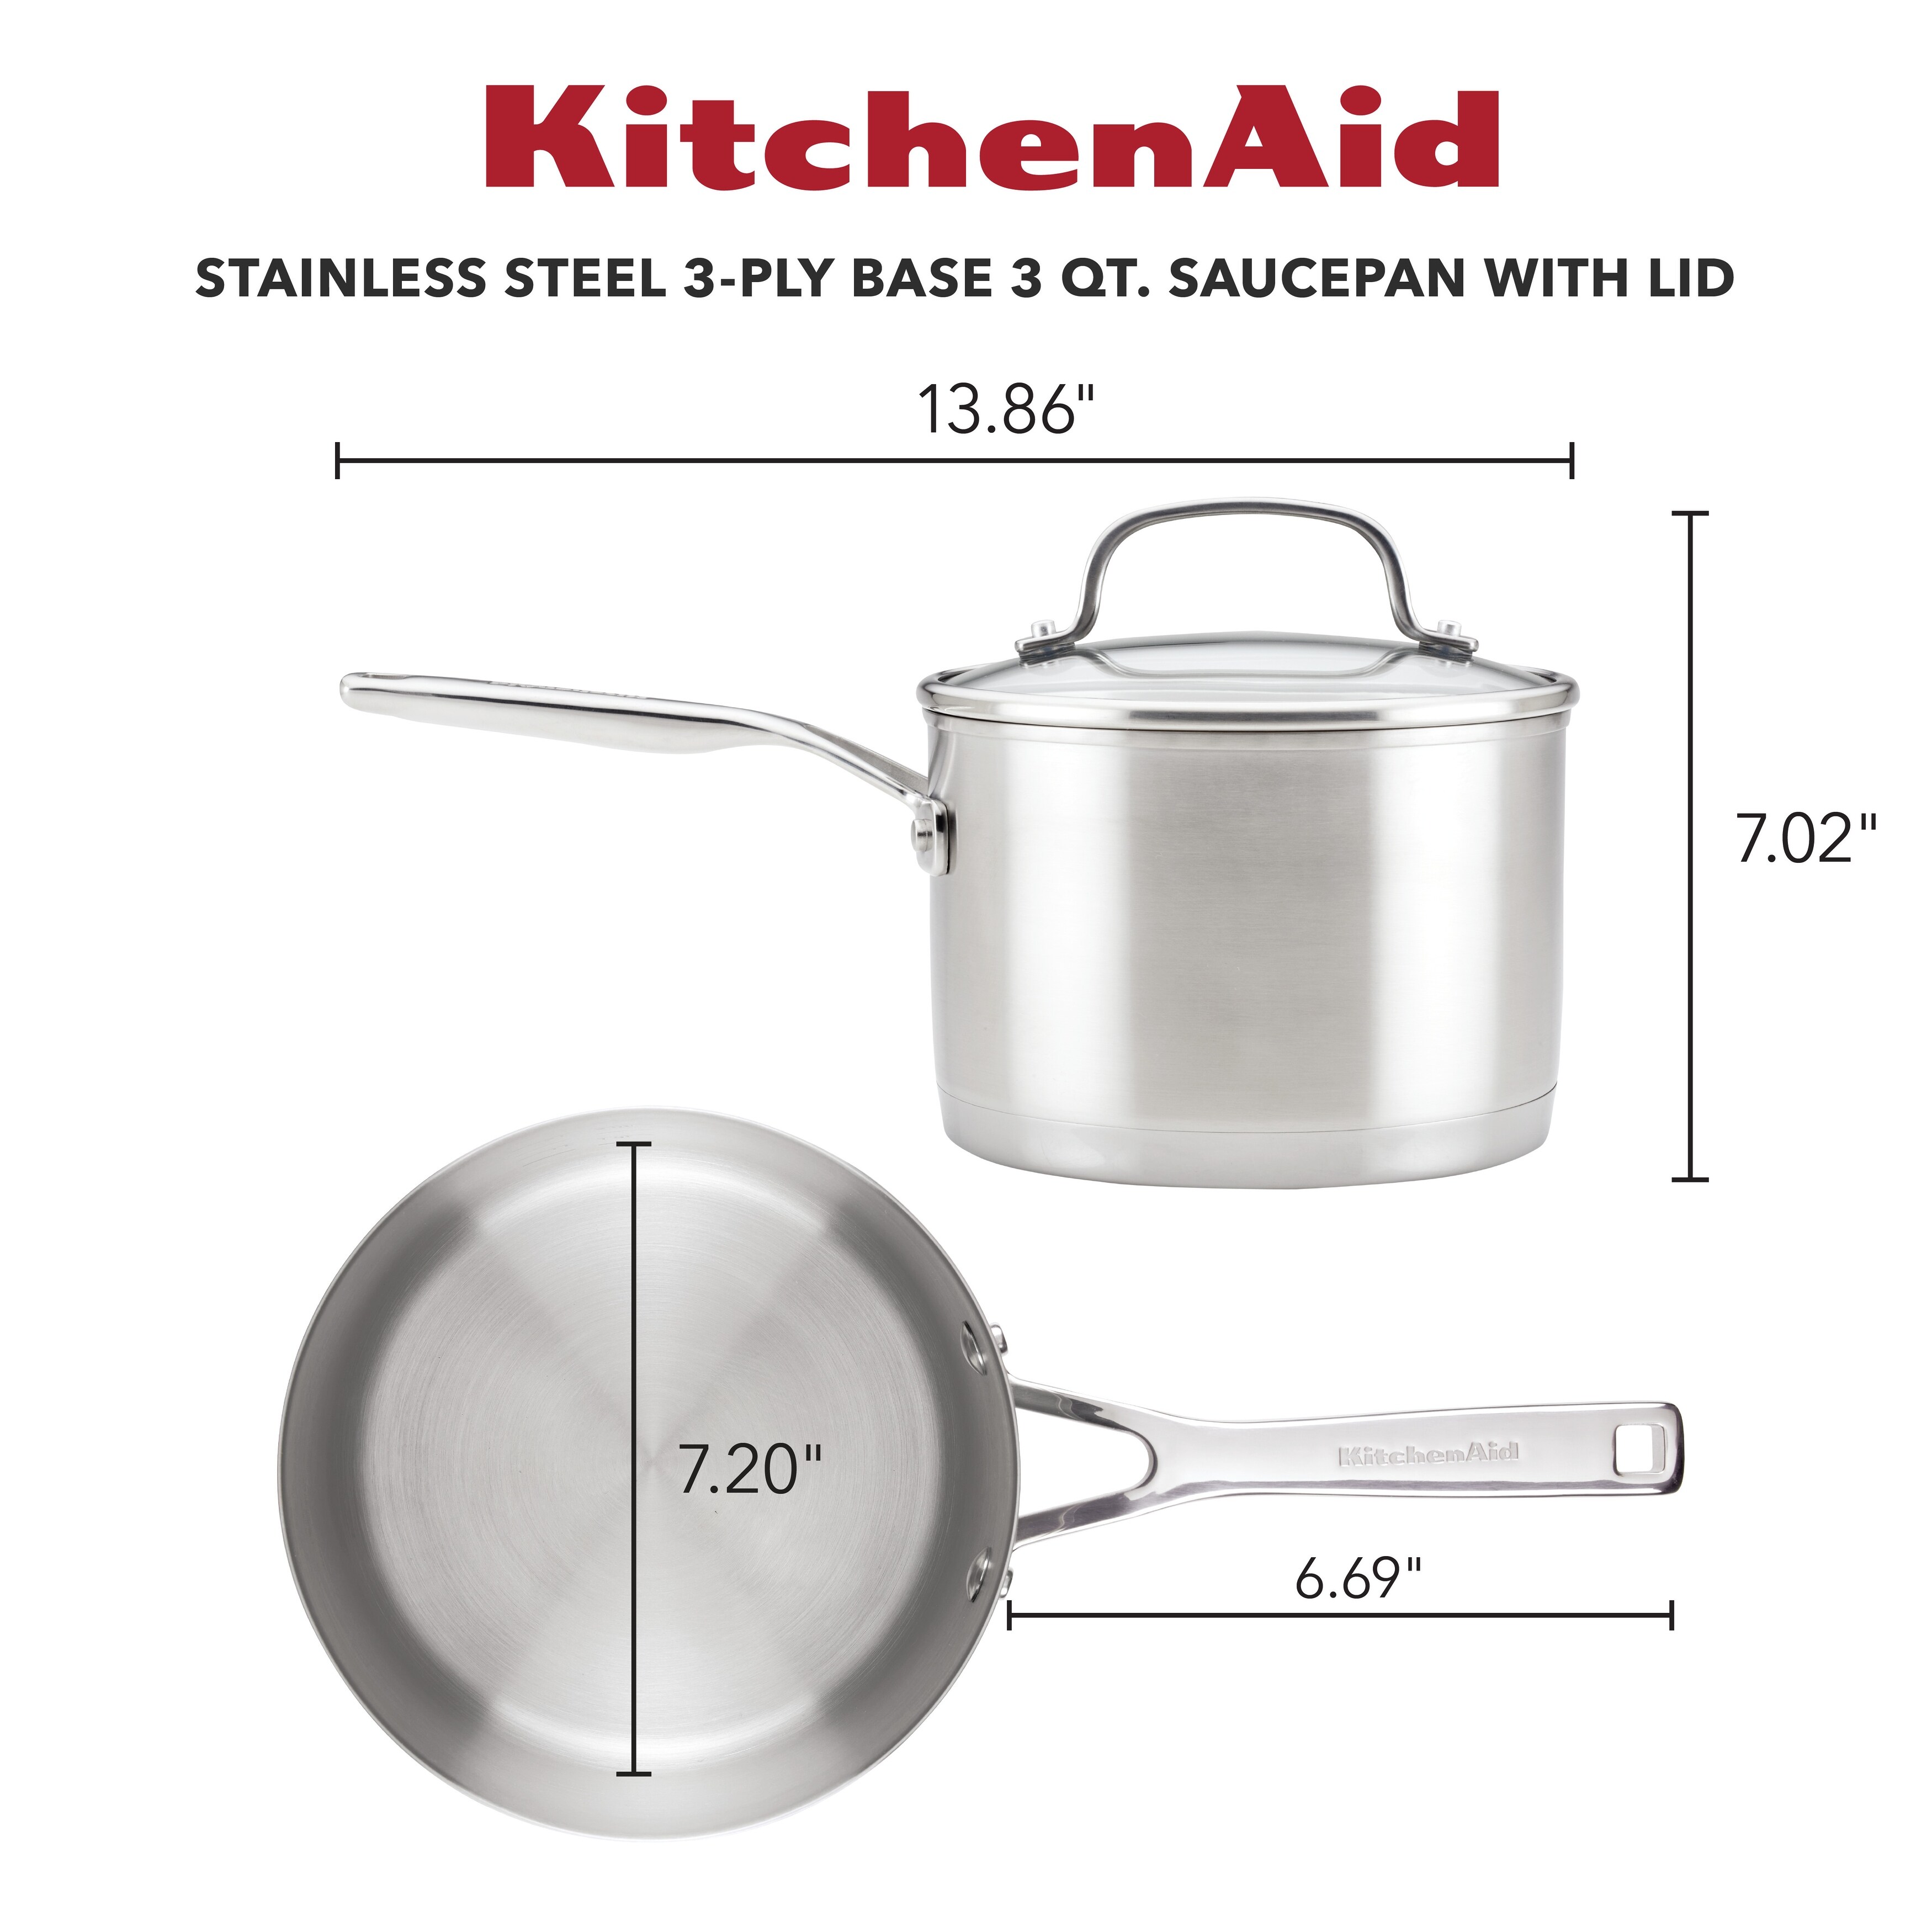 https://ak1.ostkcdn.com/images/products/is/images/direct/234a1b26b60393684955424cc9847ddba281152c/KitchenAid-3-Ply-Base-Stainless-Steel-Induction-Saucepan-with-Lid%2C-3-Quart%2C-Brushed-Stainless-Steel.jpg